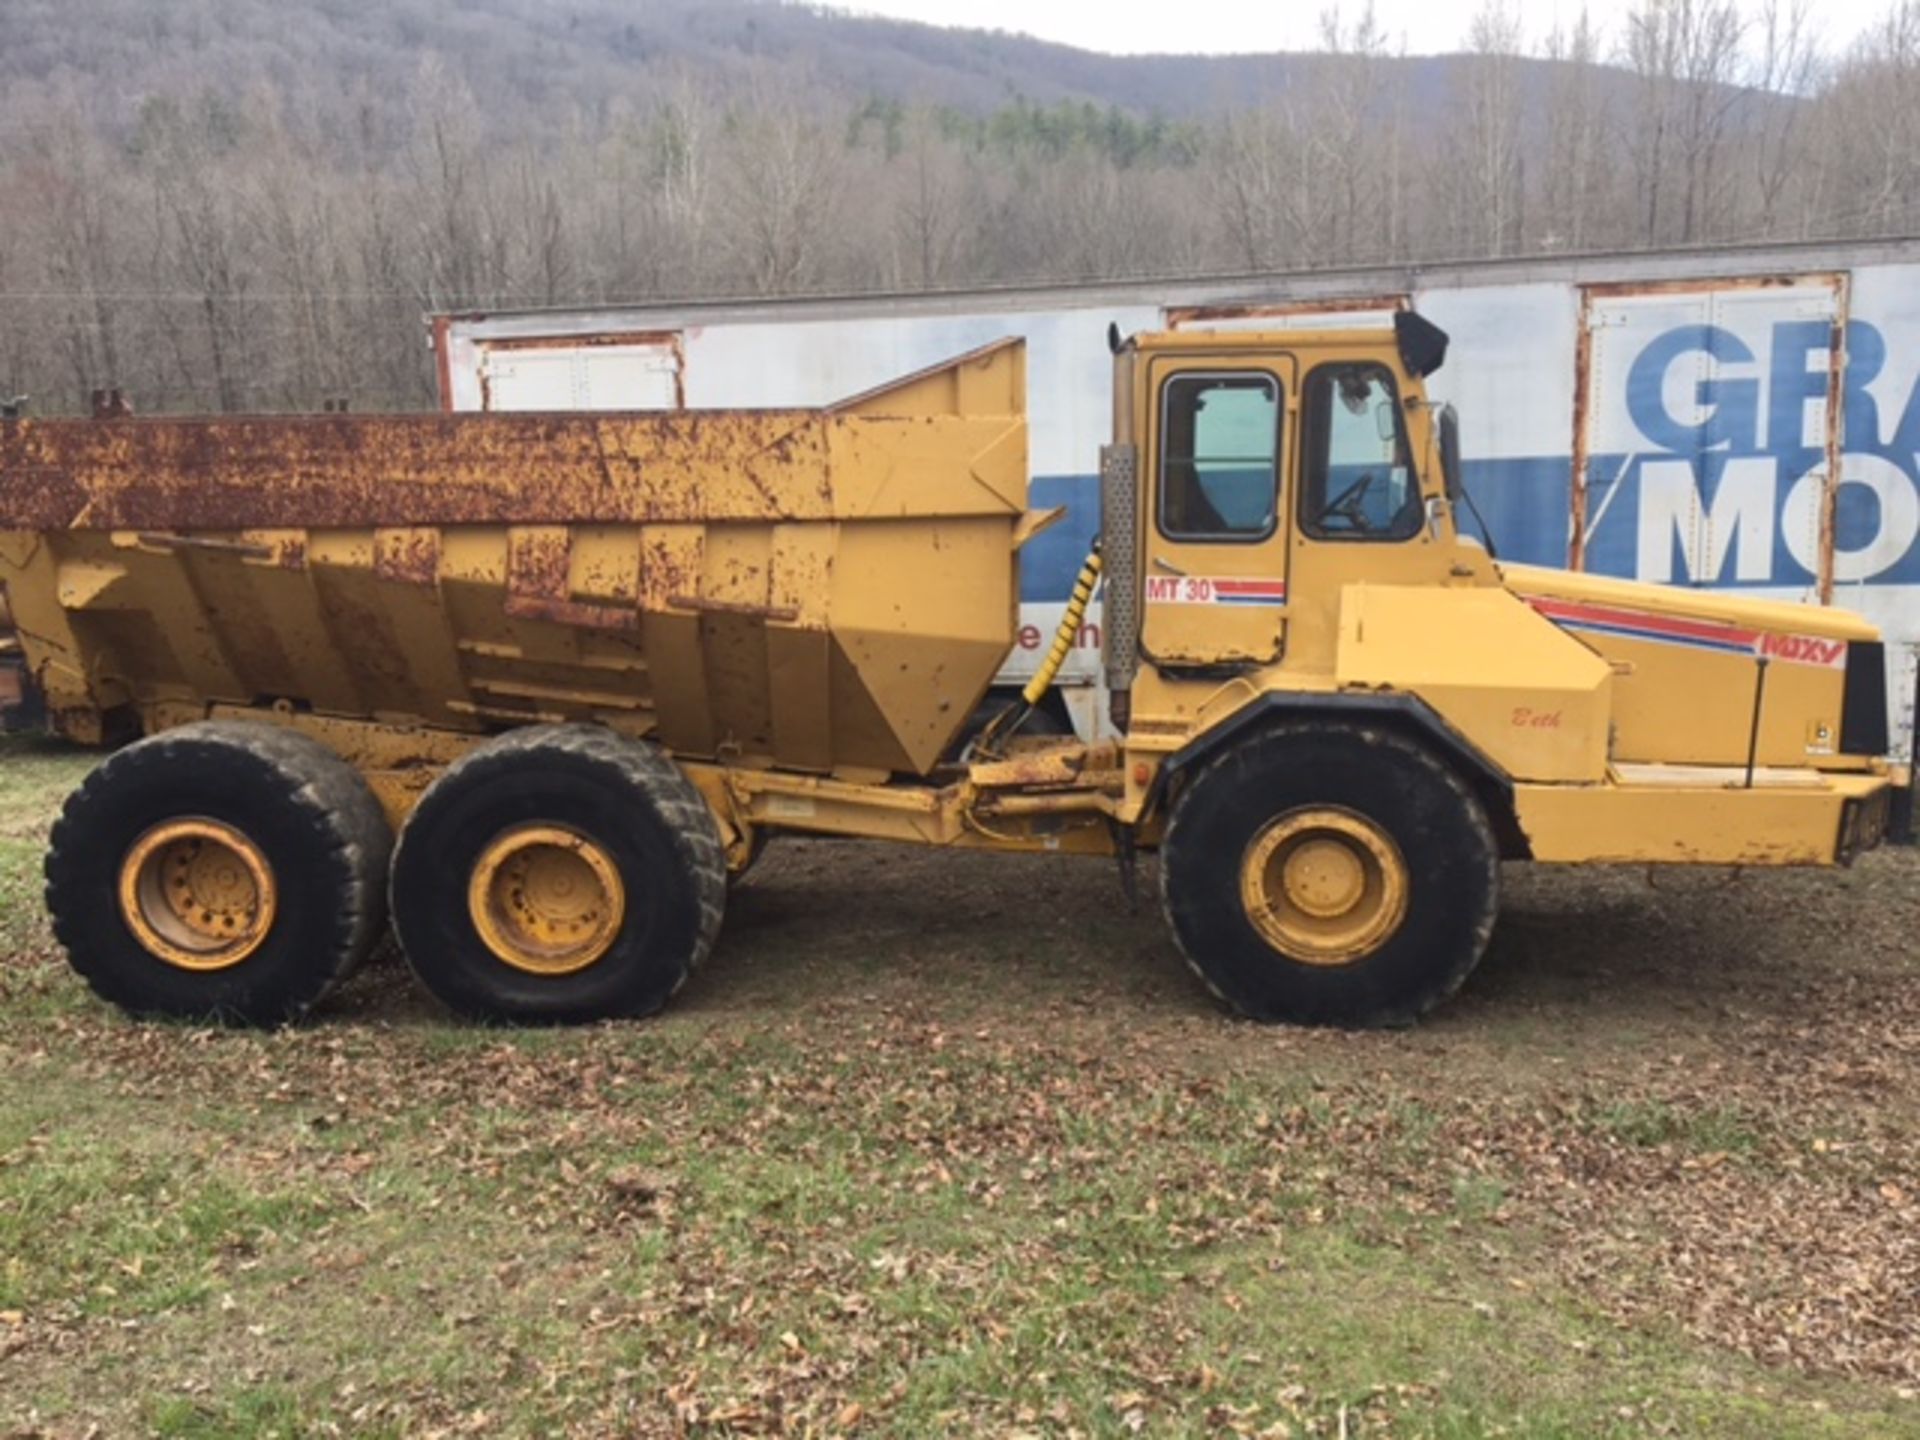 1994 Moxy, MT30 S-3 Articulating Dump Truck, 30 Ton, 15,650 hrs., 23.5-25 Tires, S/N 352124, - Image 2 of 4